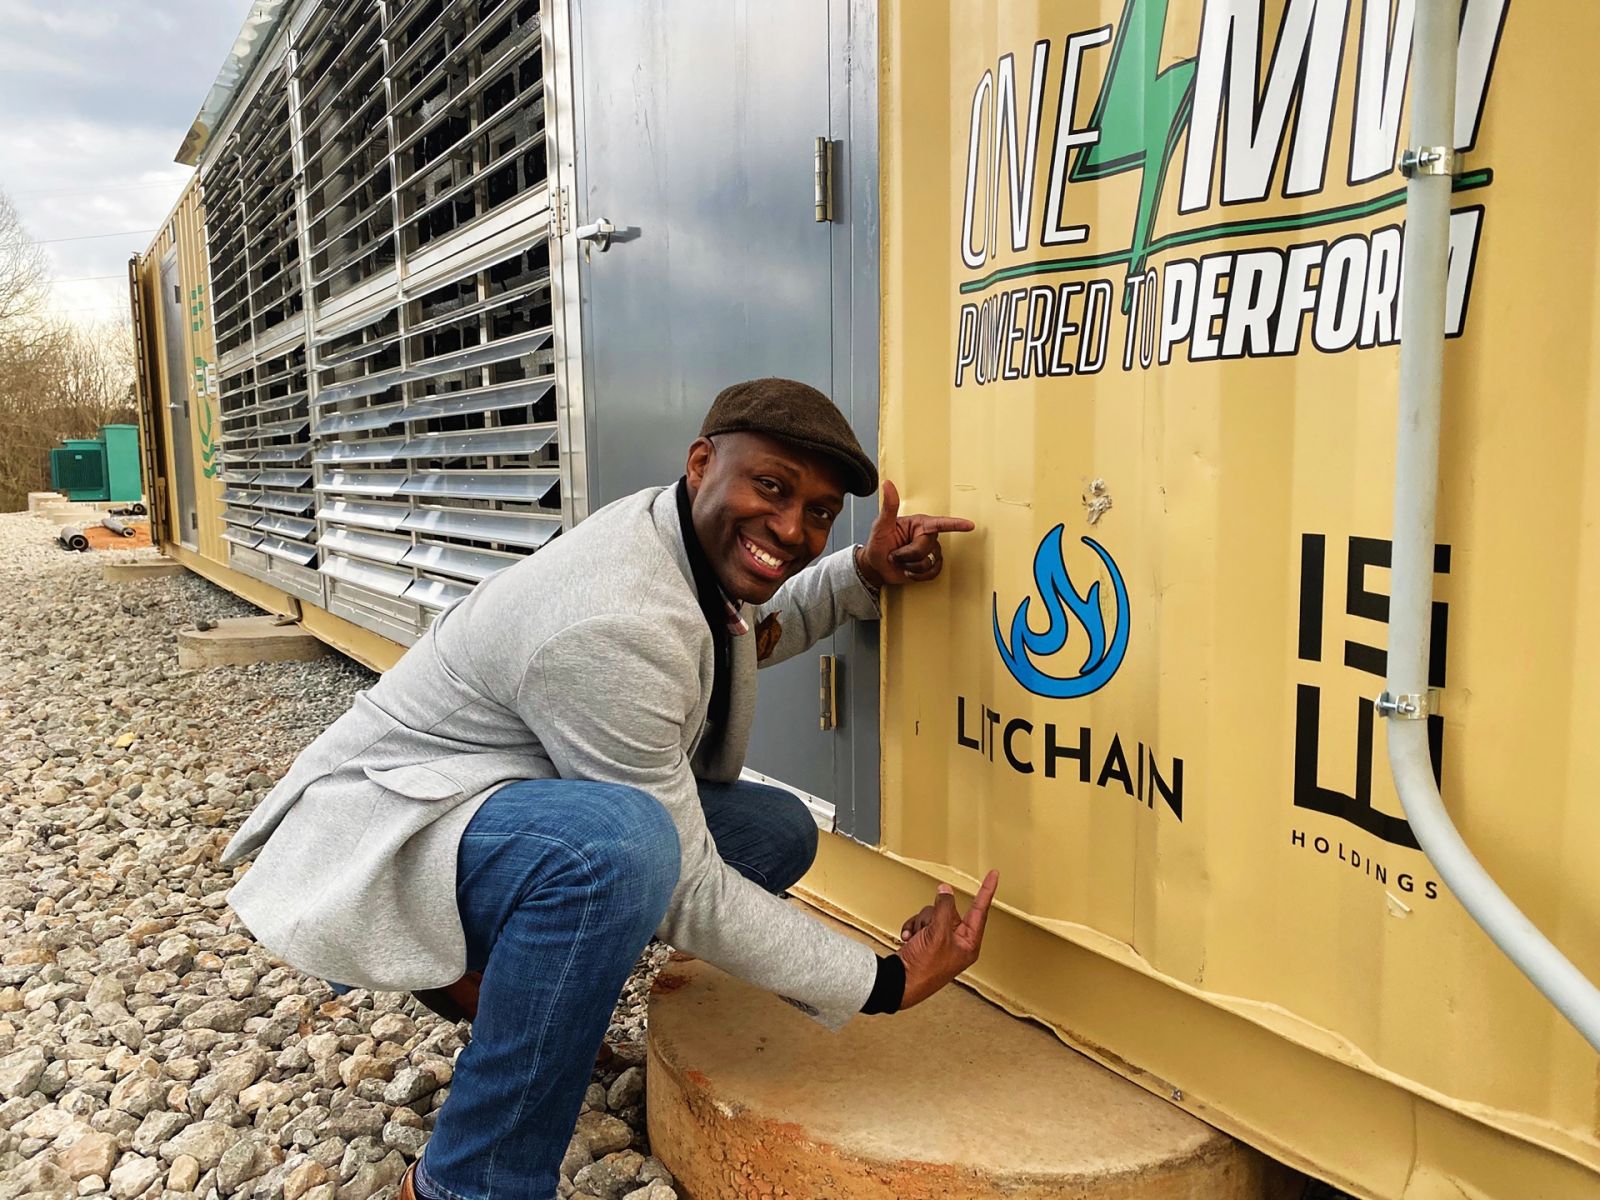 Litchain founder Tony Tate has installed a site of portable cryptomining pods in Gaffney with an $80 million investment, but he said that‰Ûªs just the beginning of his rollout across the state. (Photo/Provided)